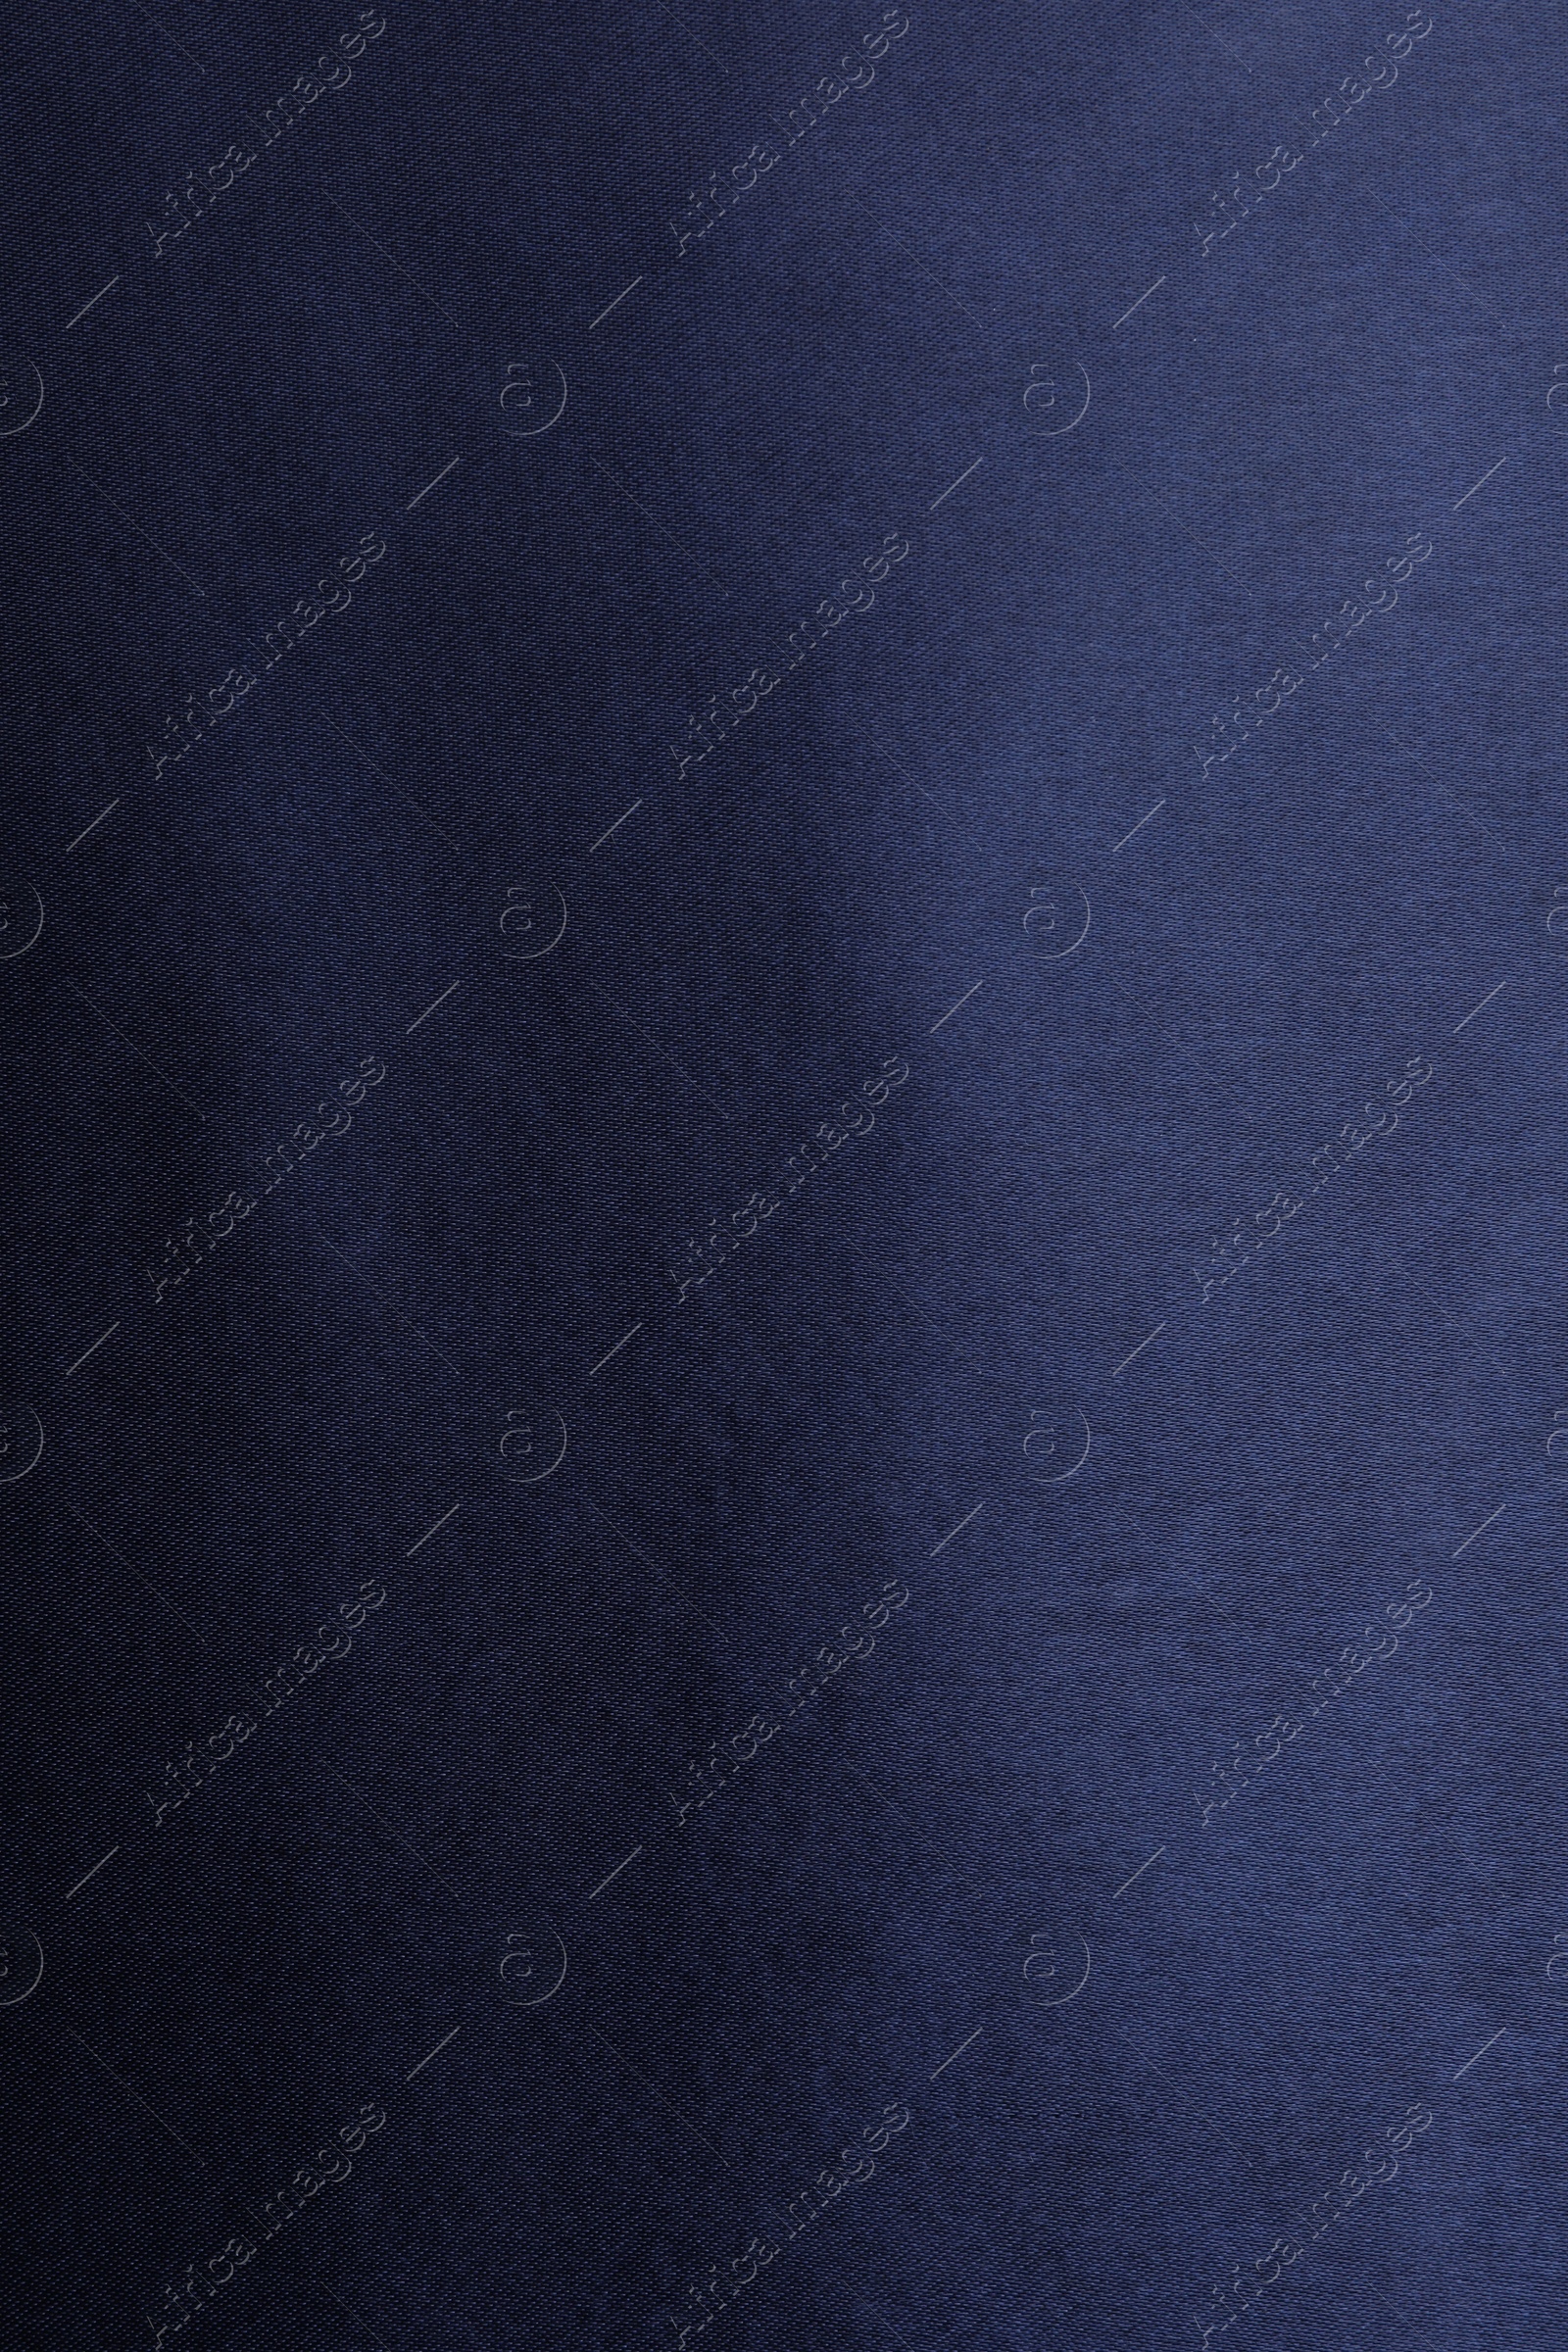 Photo of Texture of dark blue silk fabric as background, top view